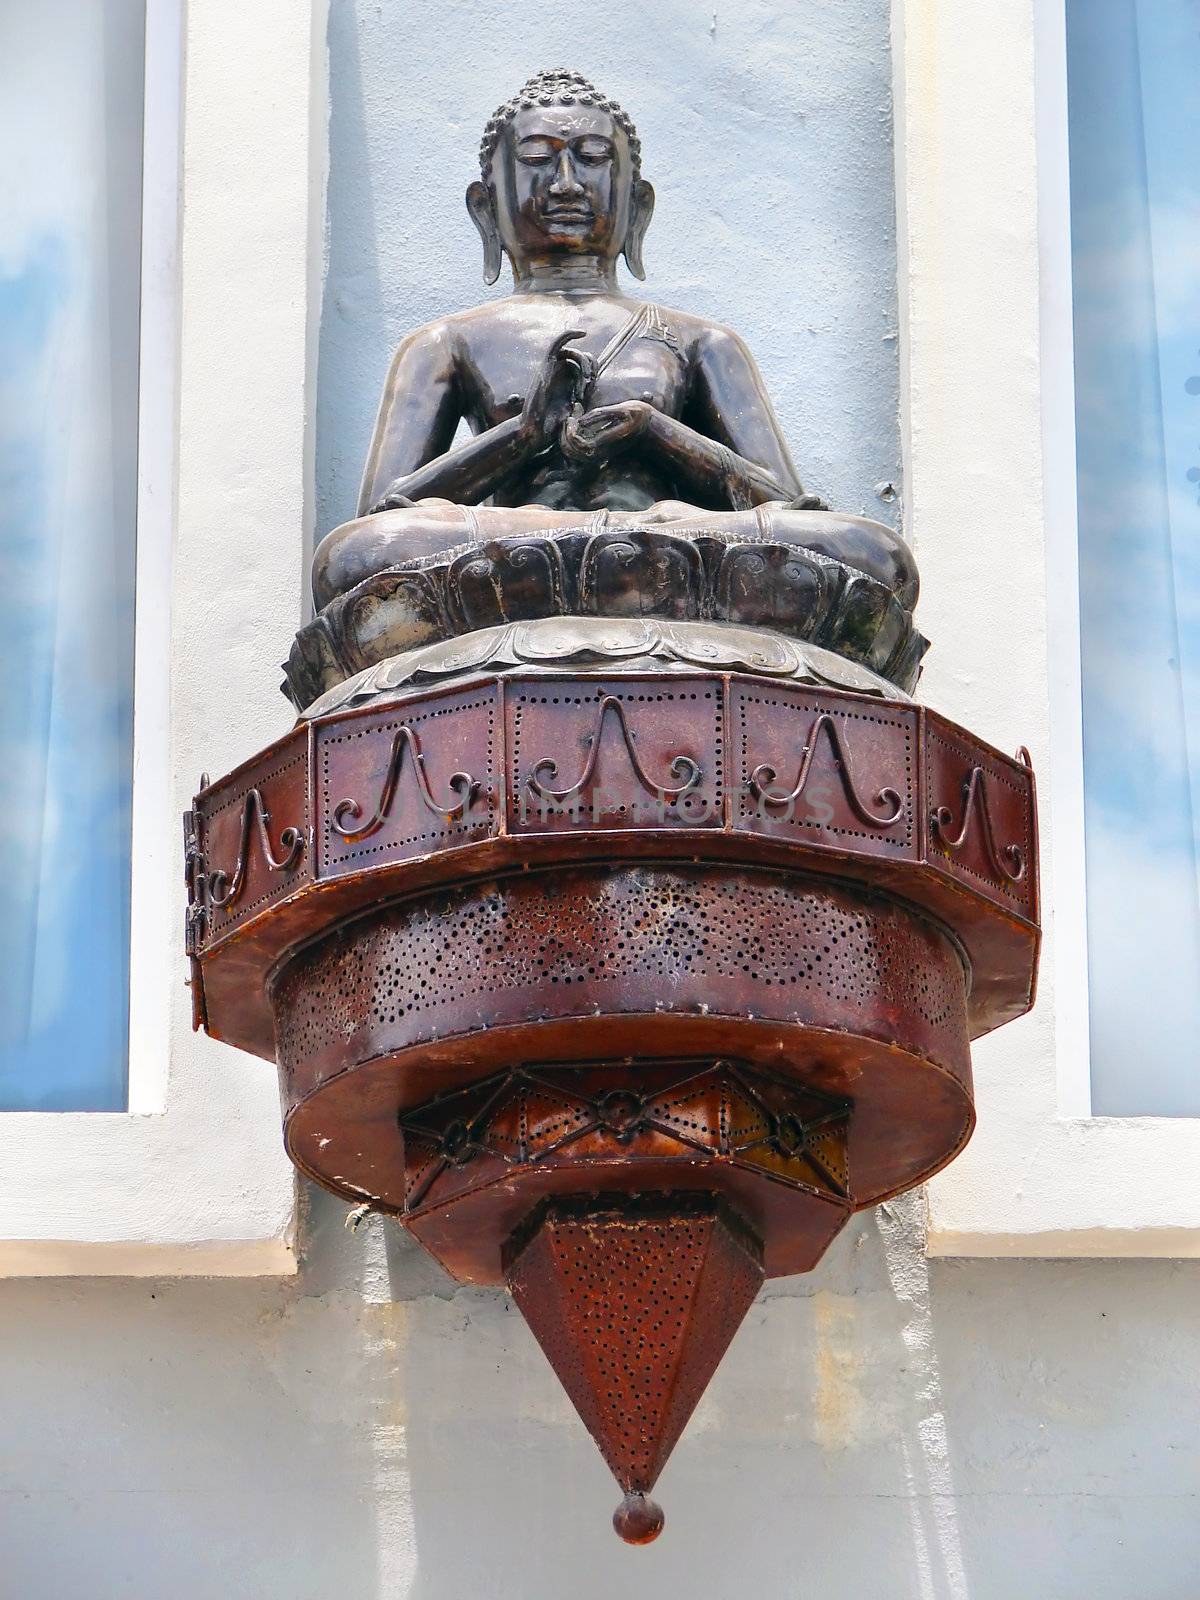 Cast iron and copper budha lantern against light blue stucco wall.